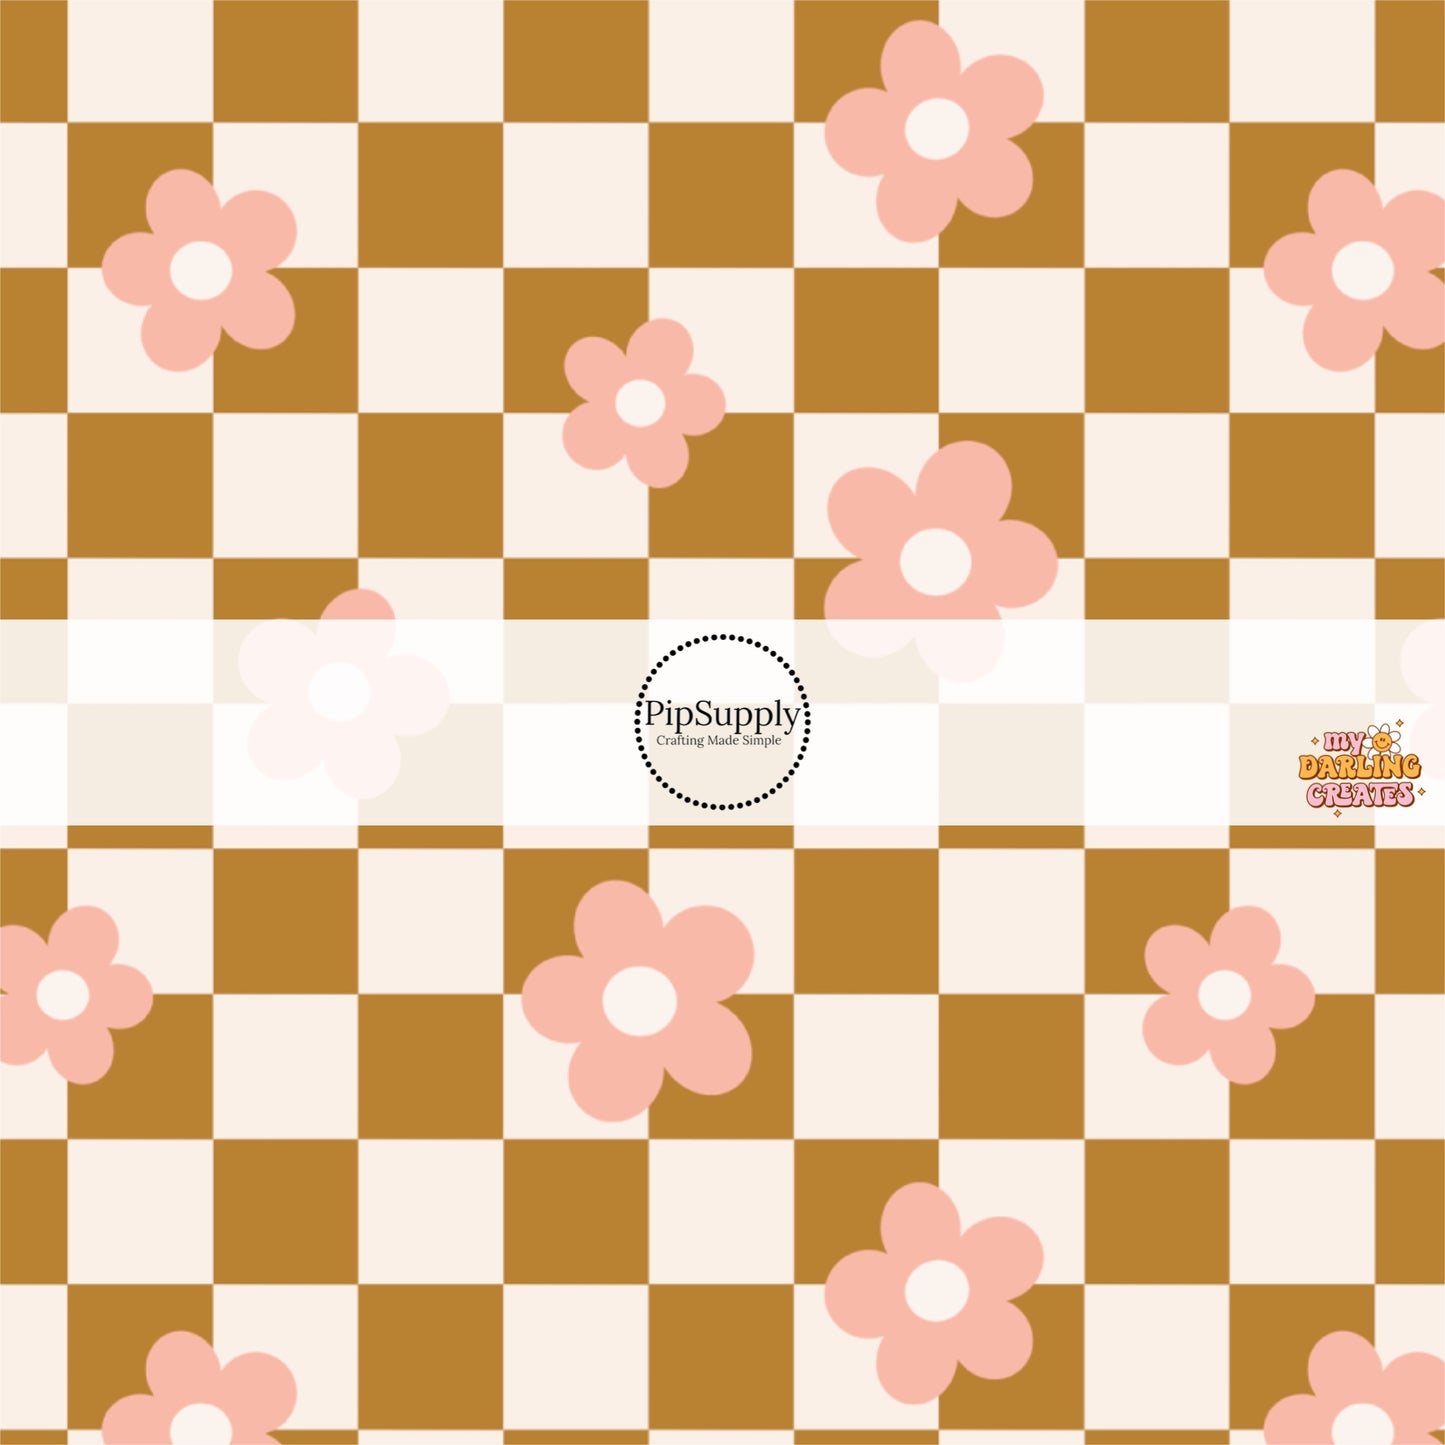 Bronze and white checkered print fabric by the yard with scattered pink daisies.